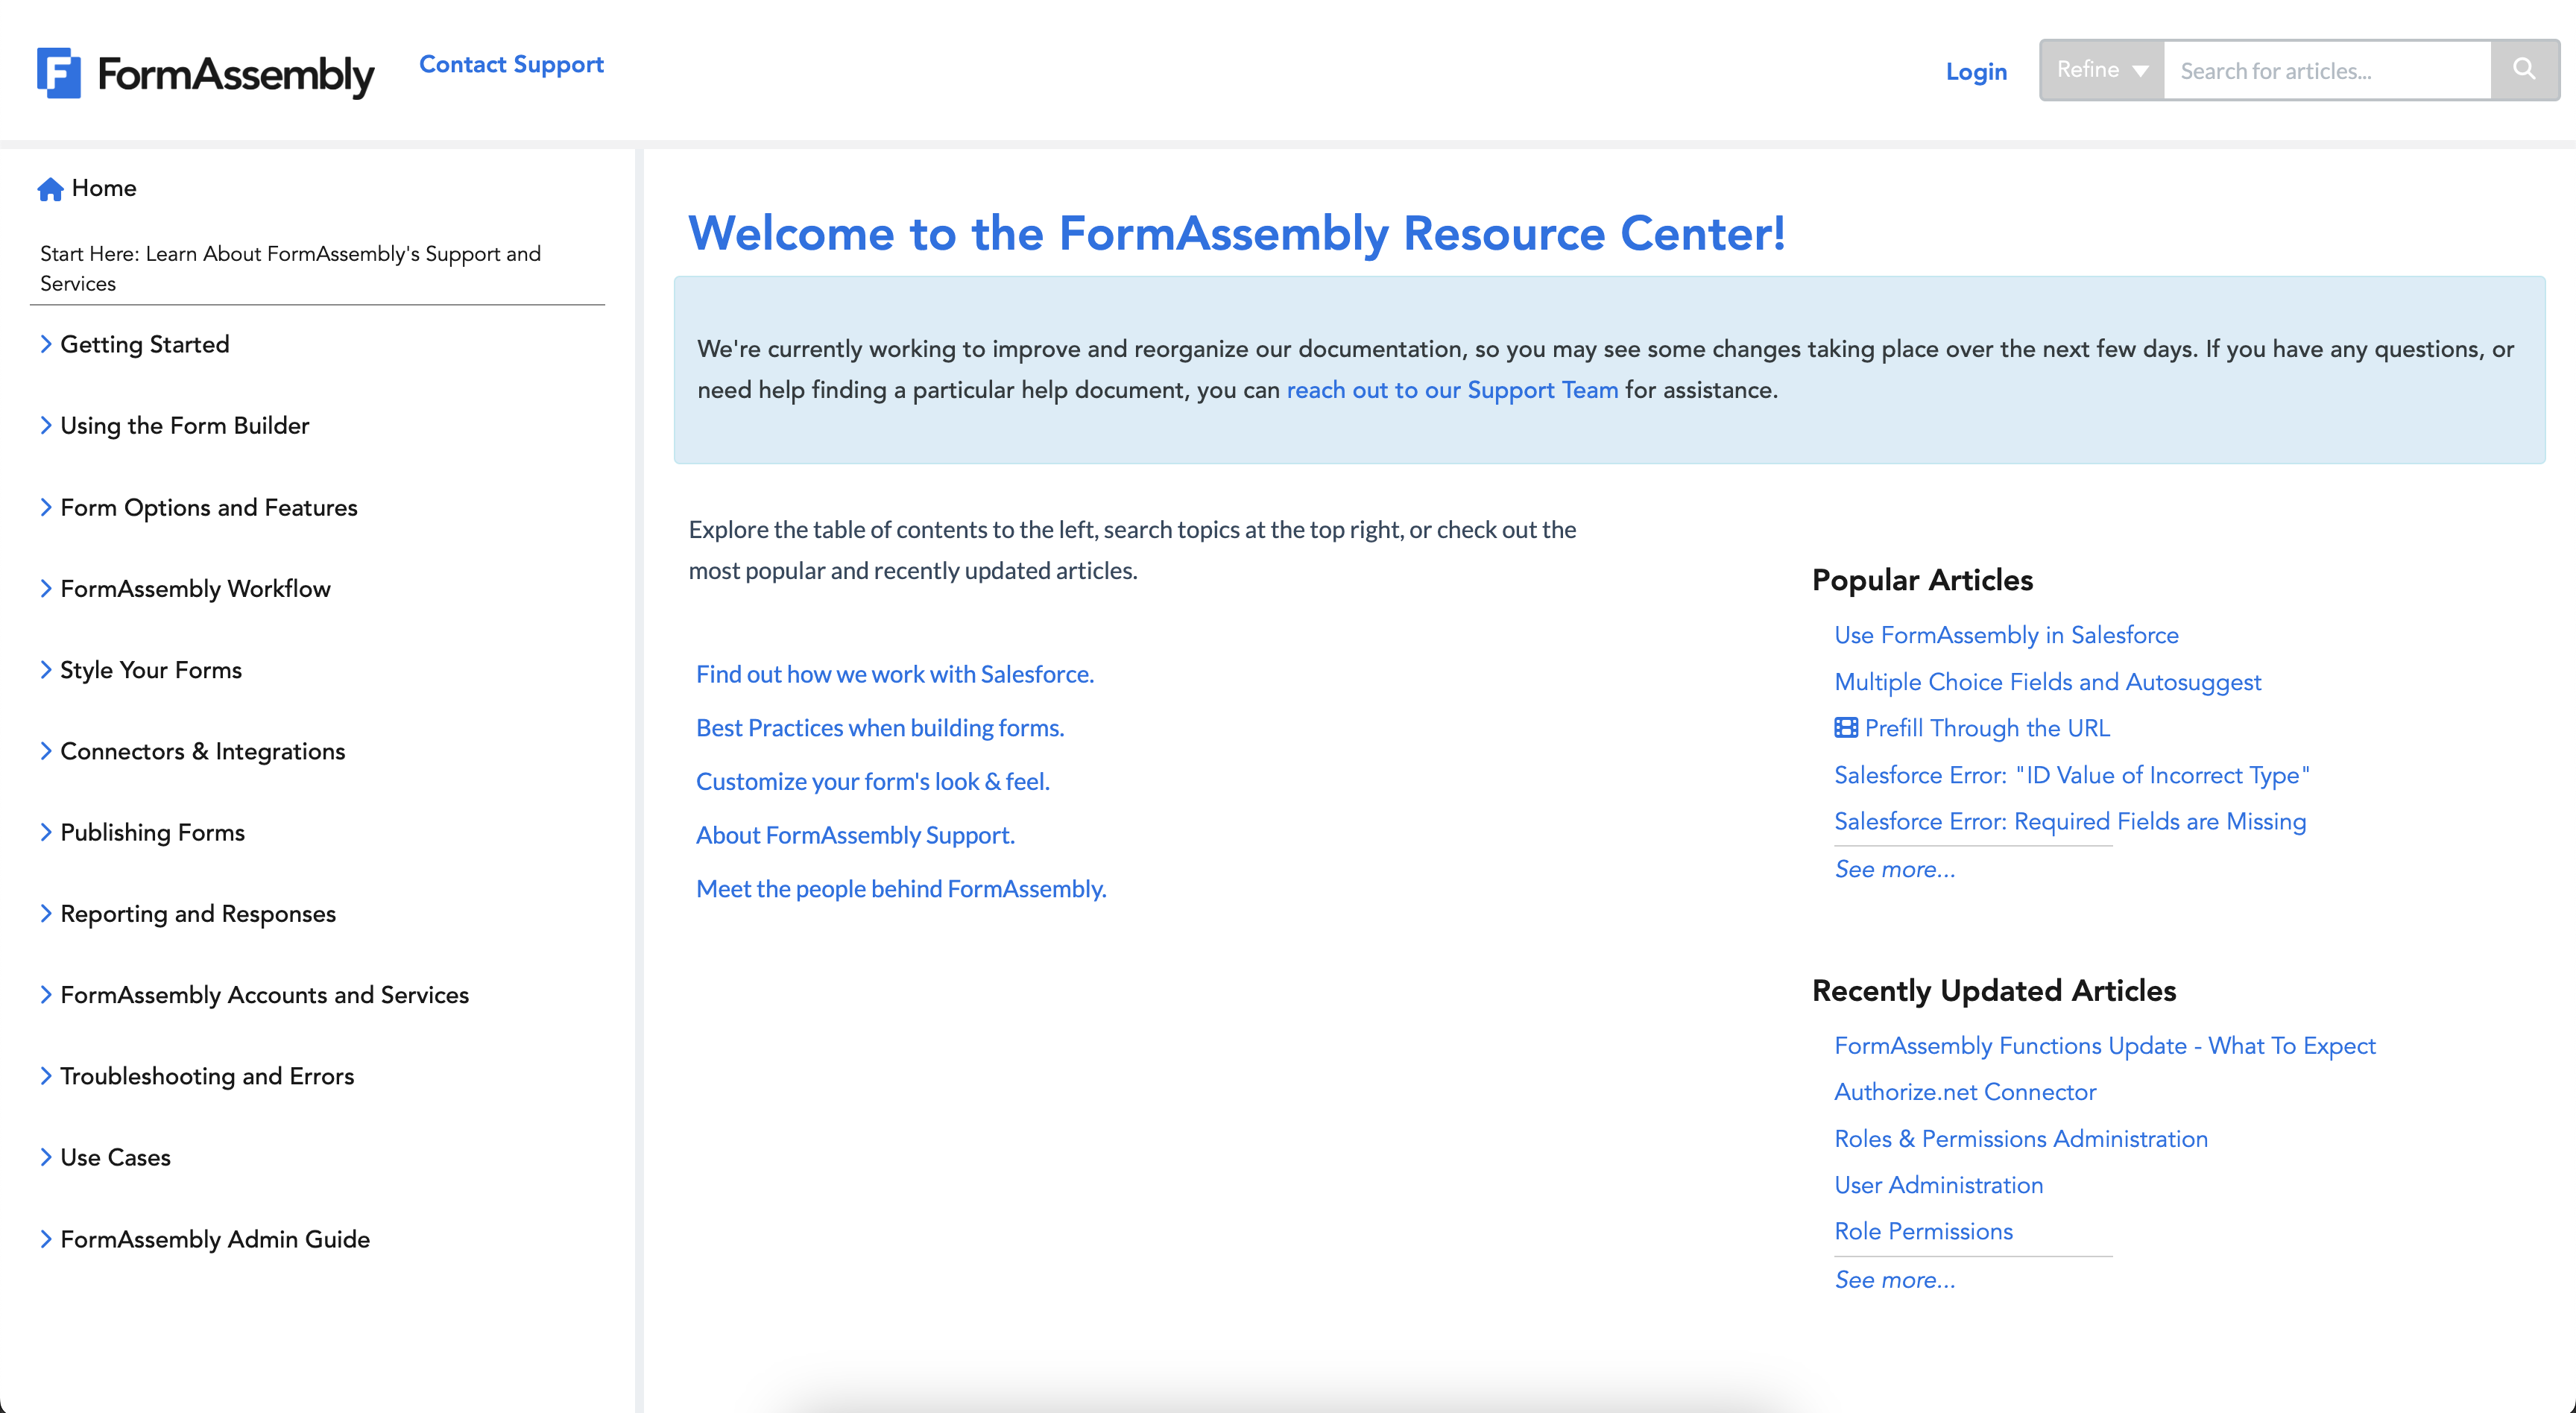 FormAssembly Resource Center